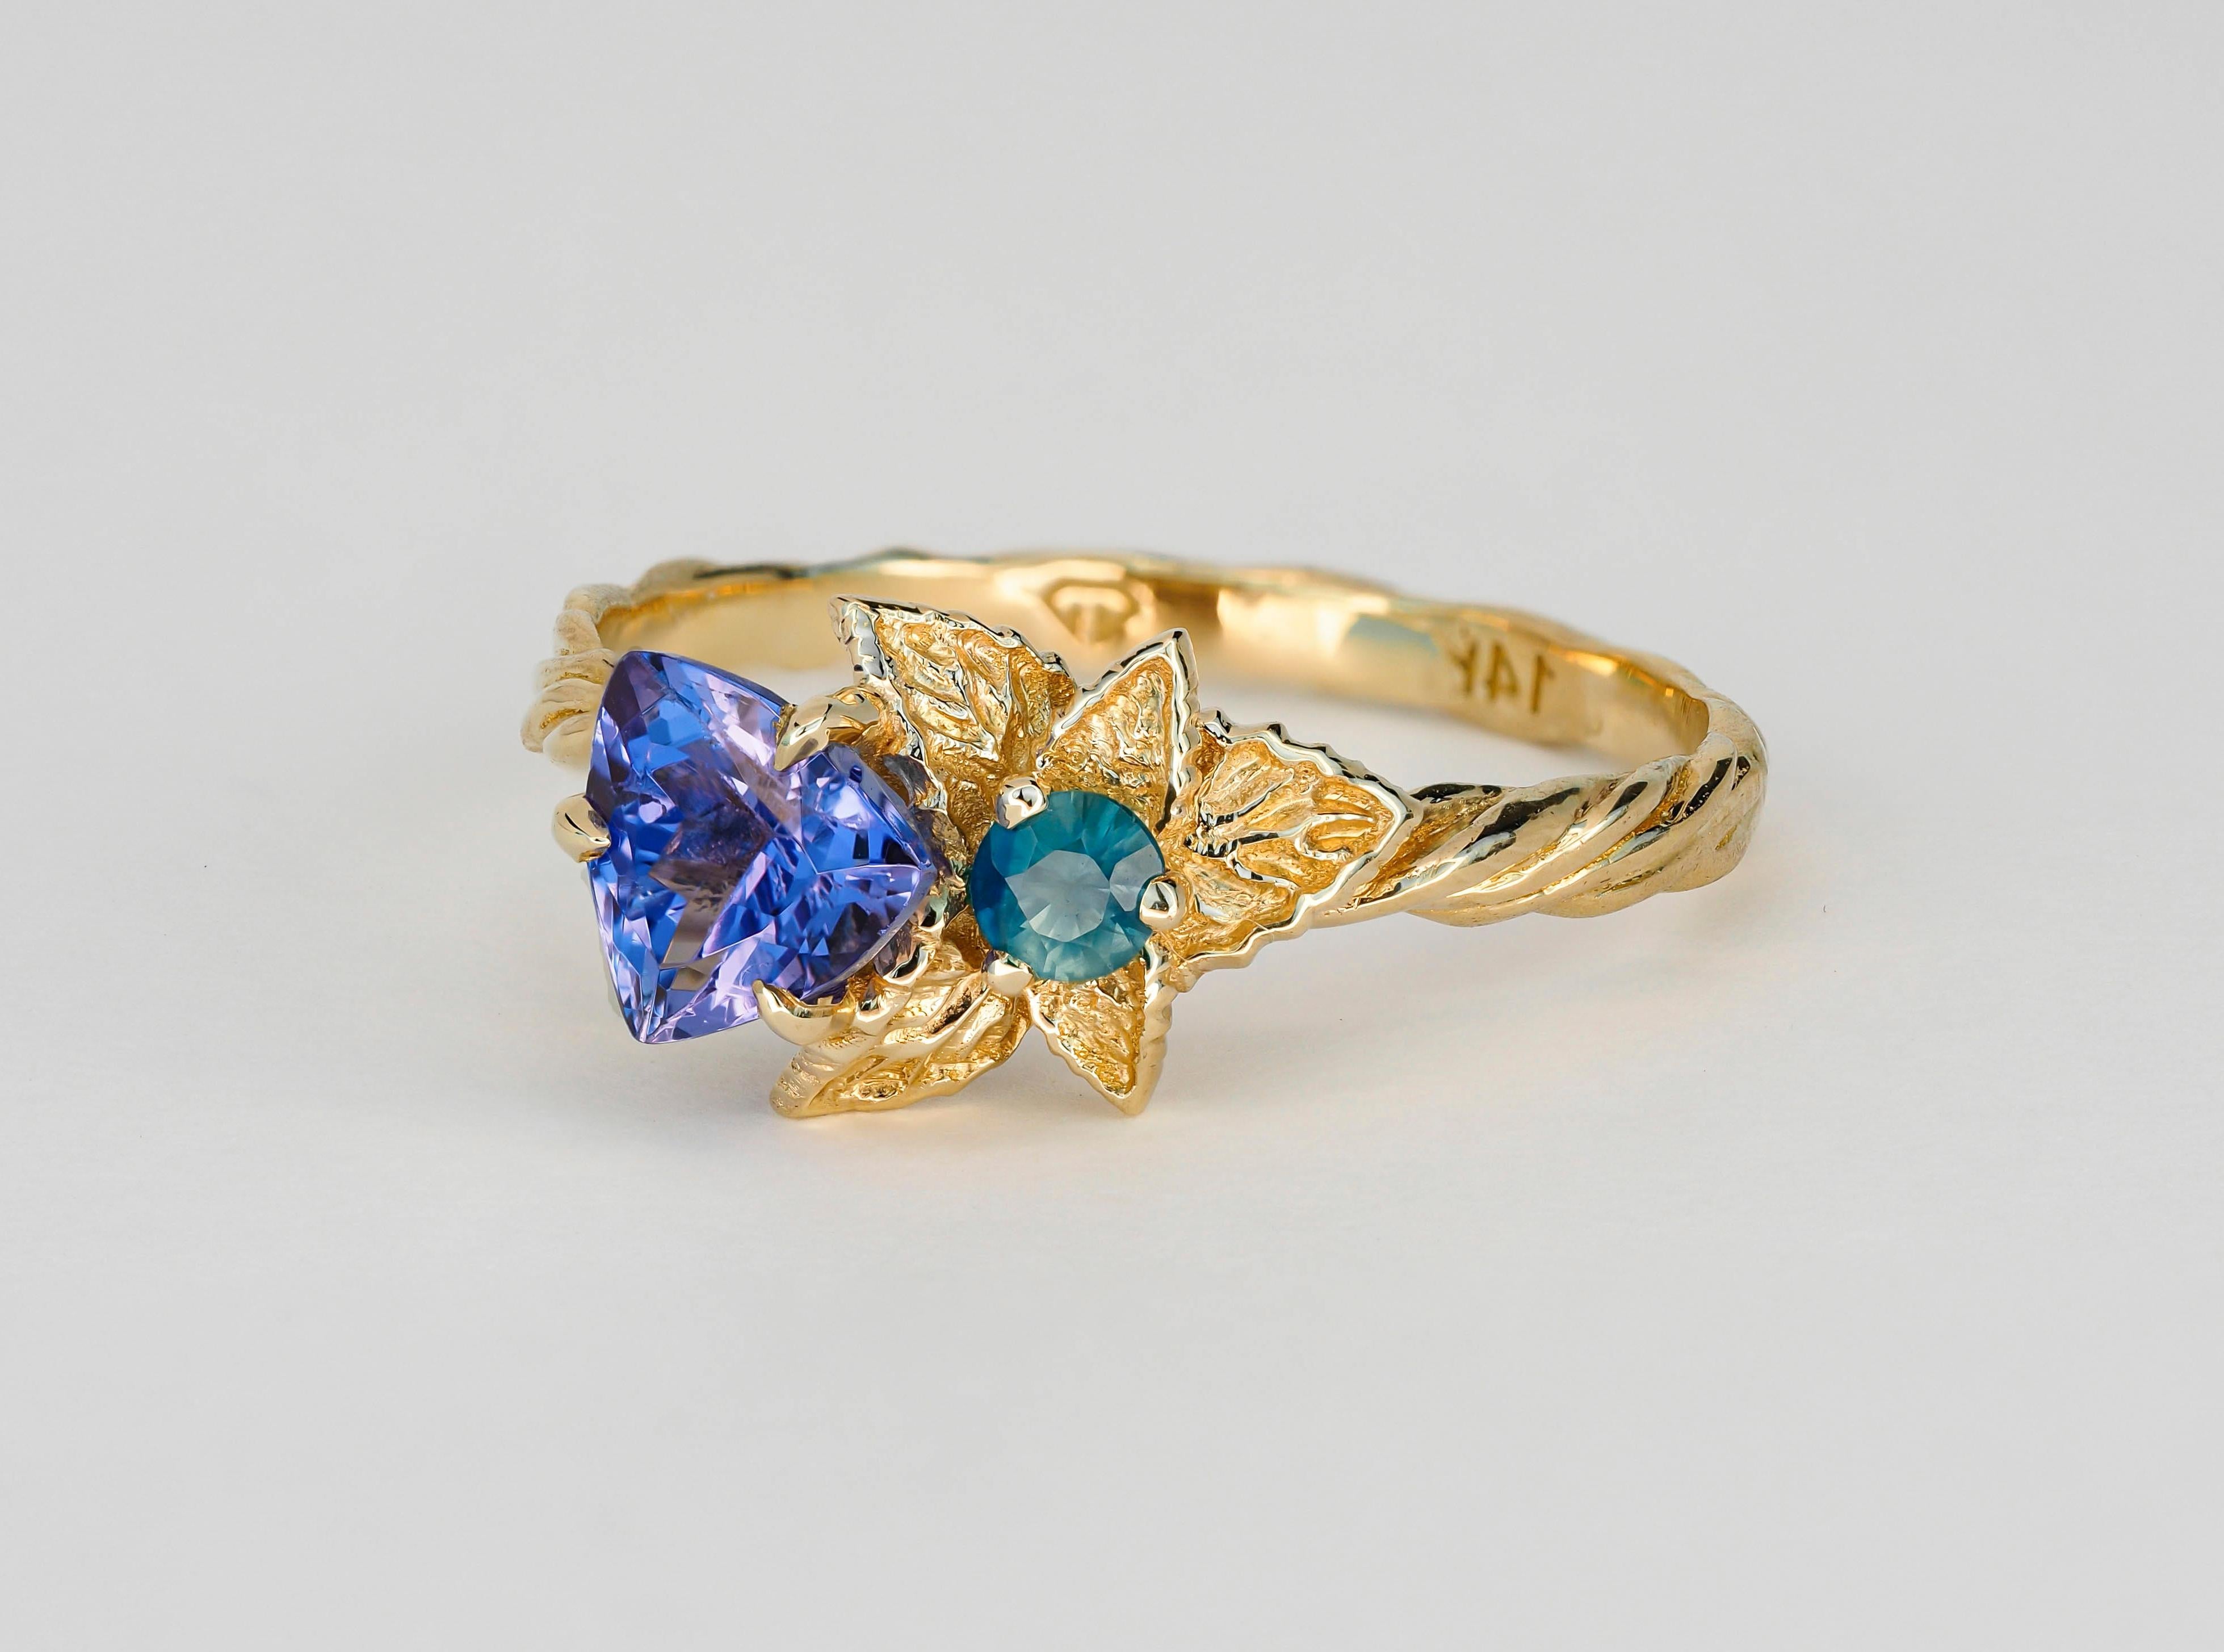 For Sale:  Tanzanite and diamonds 14k gold ring. Flower design ring with tanzanite. 12